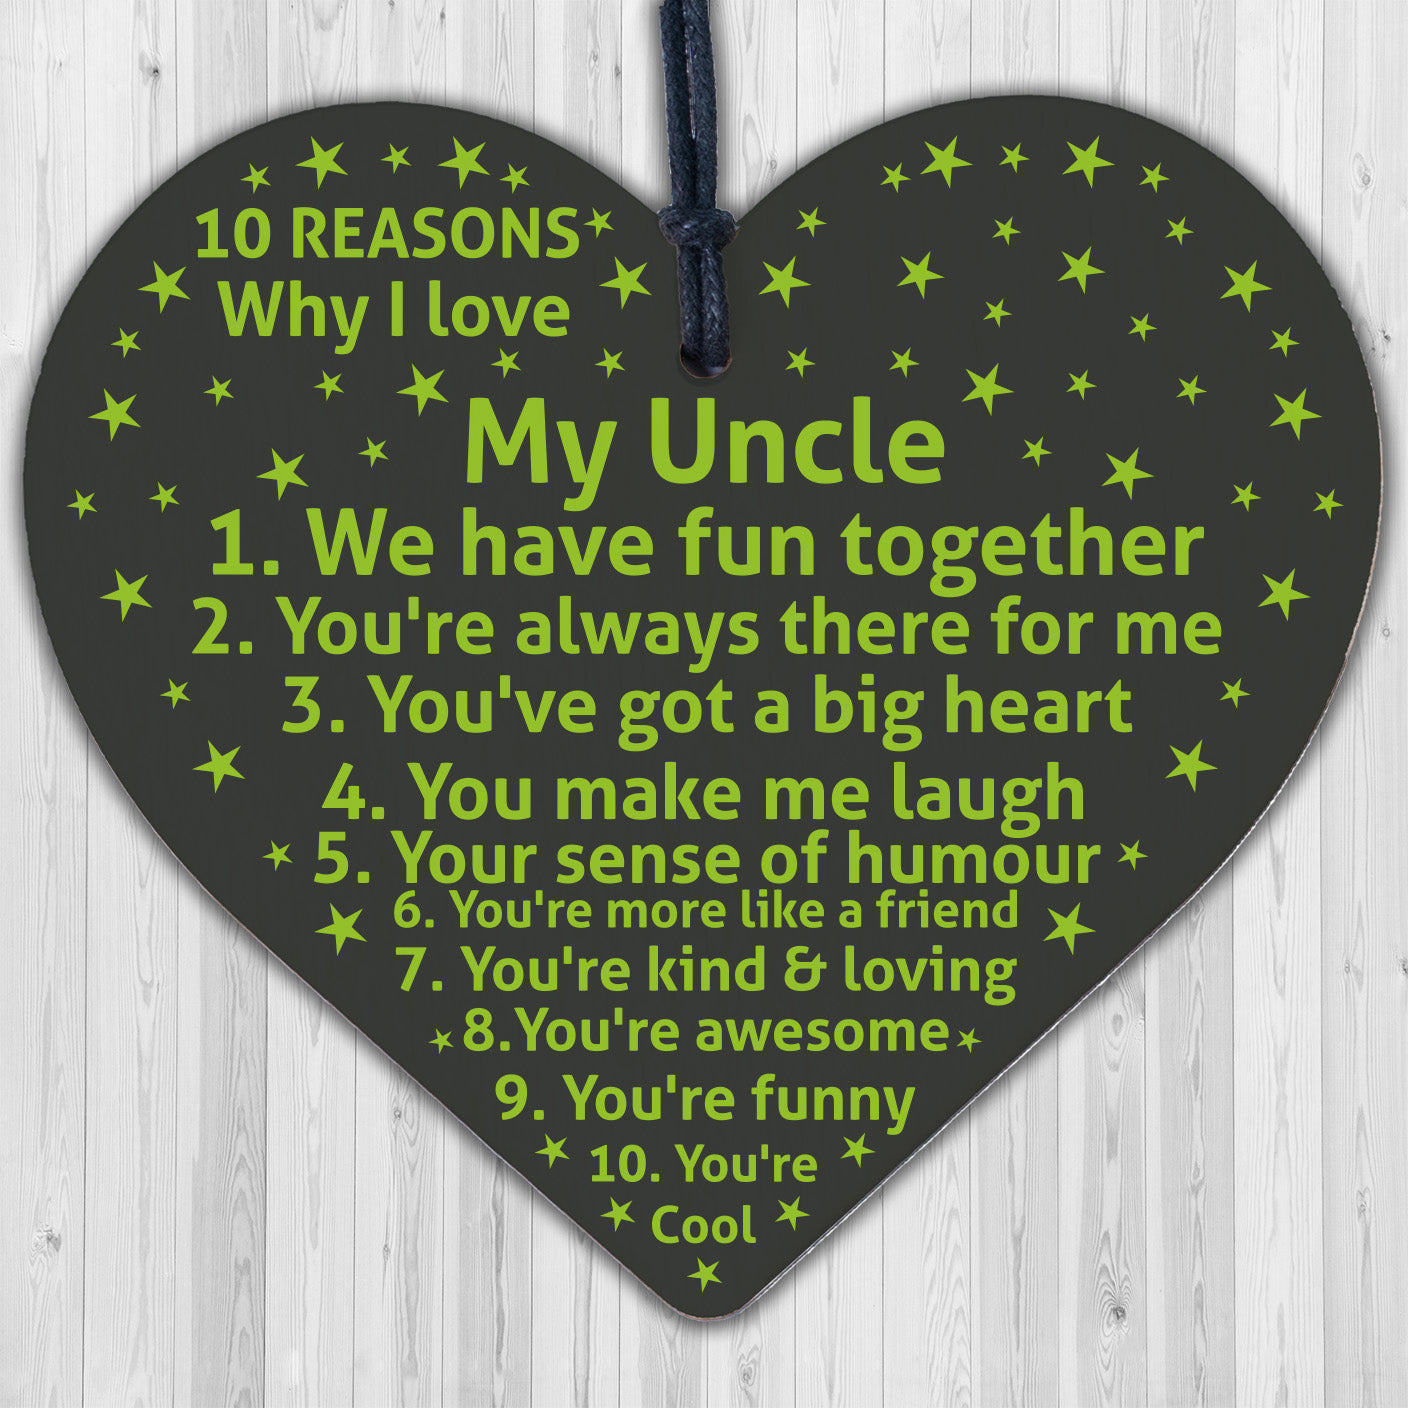 10 reasons why i love you quotes